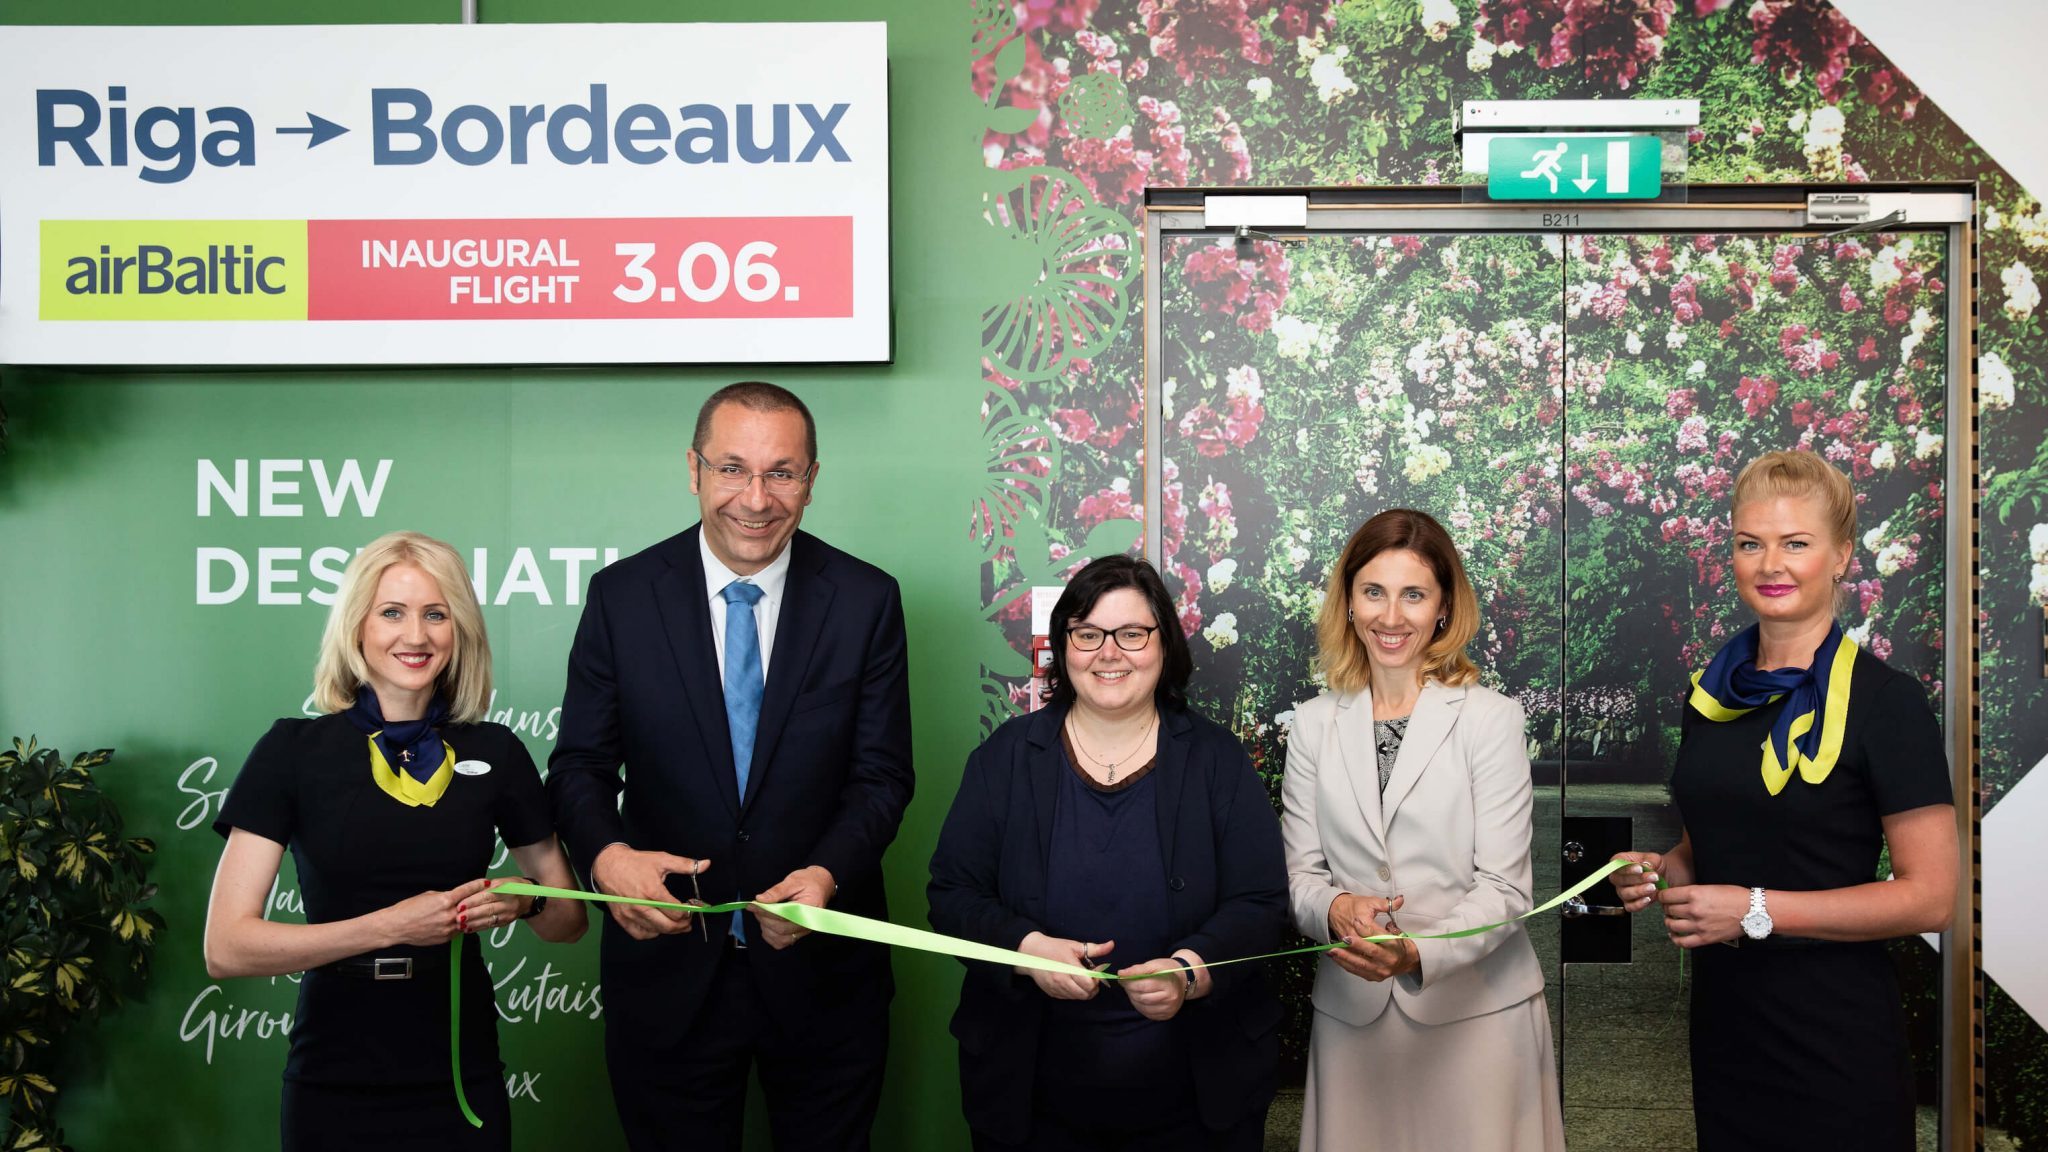 airBaltic launches flights from Riga to Bordeaux